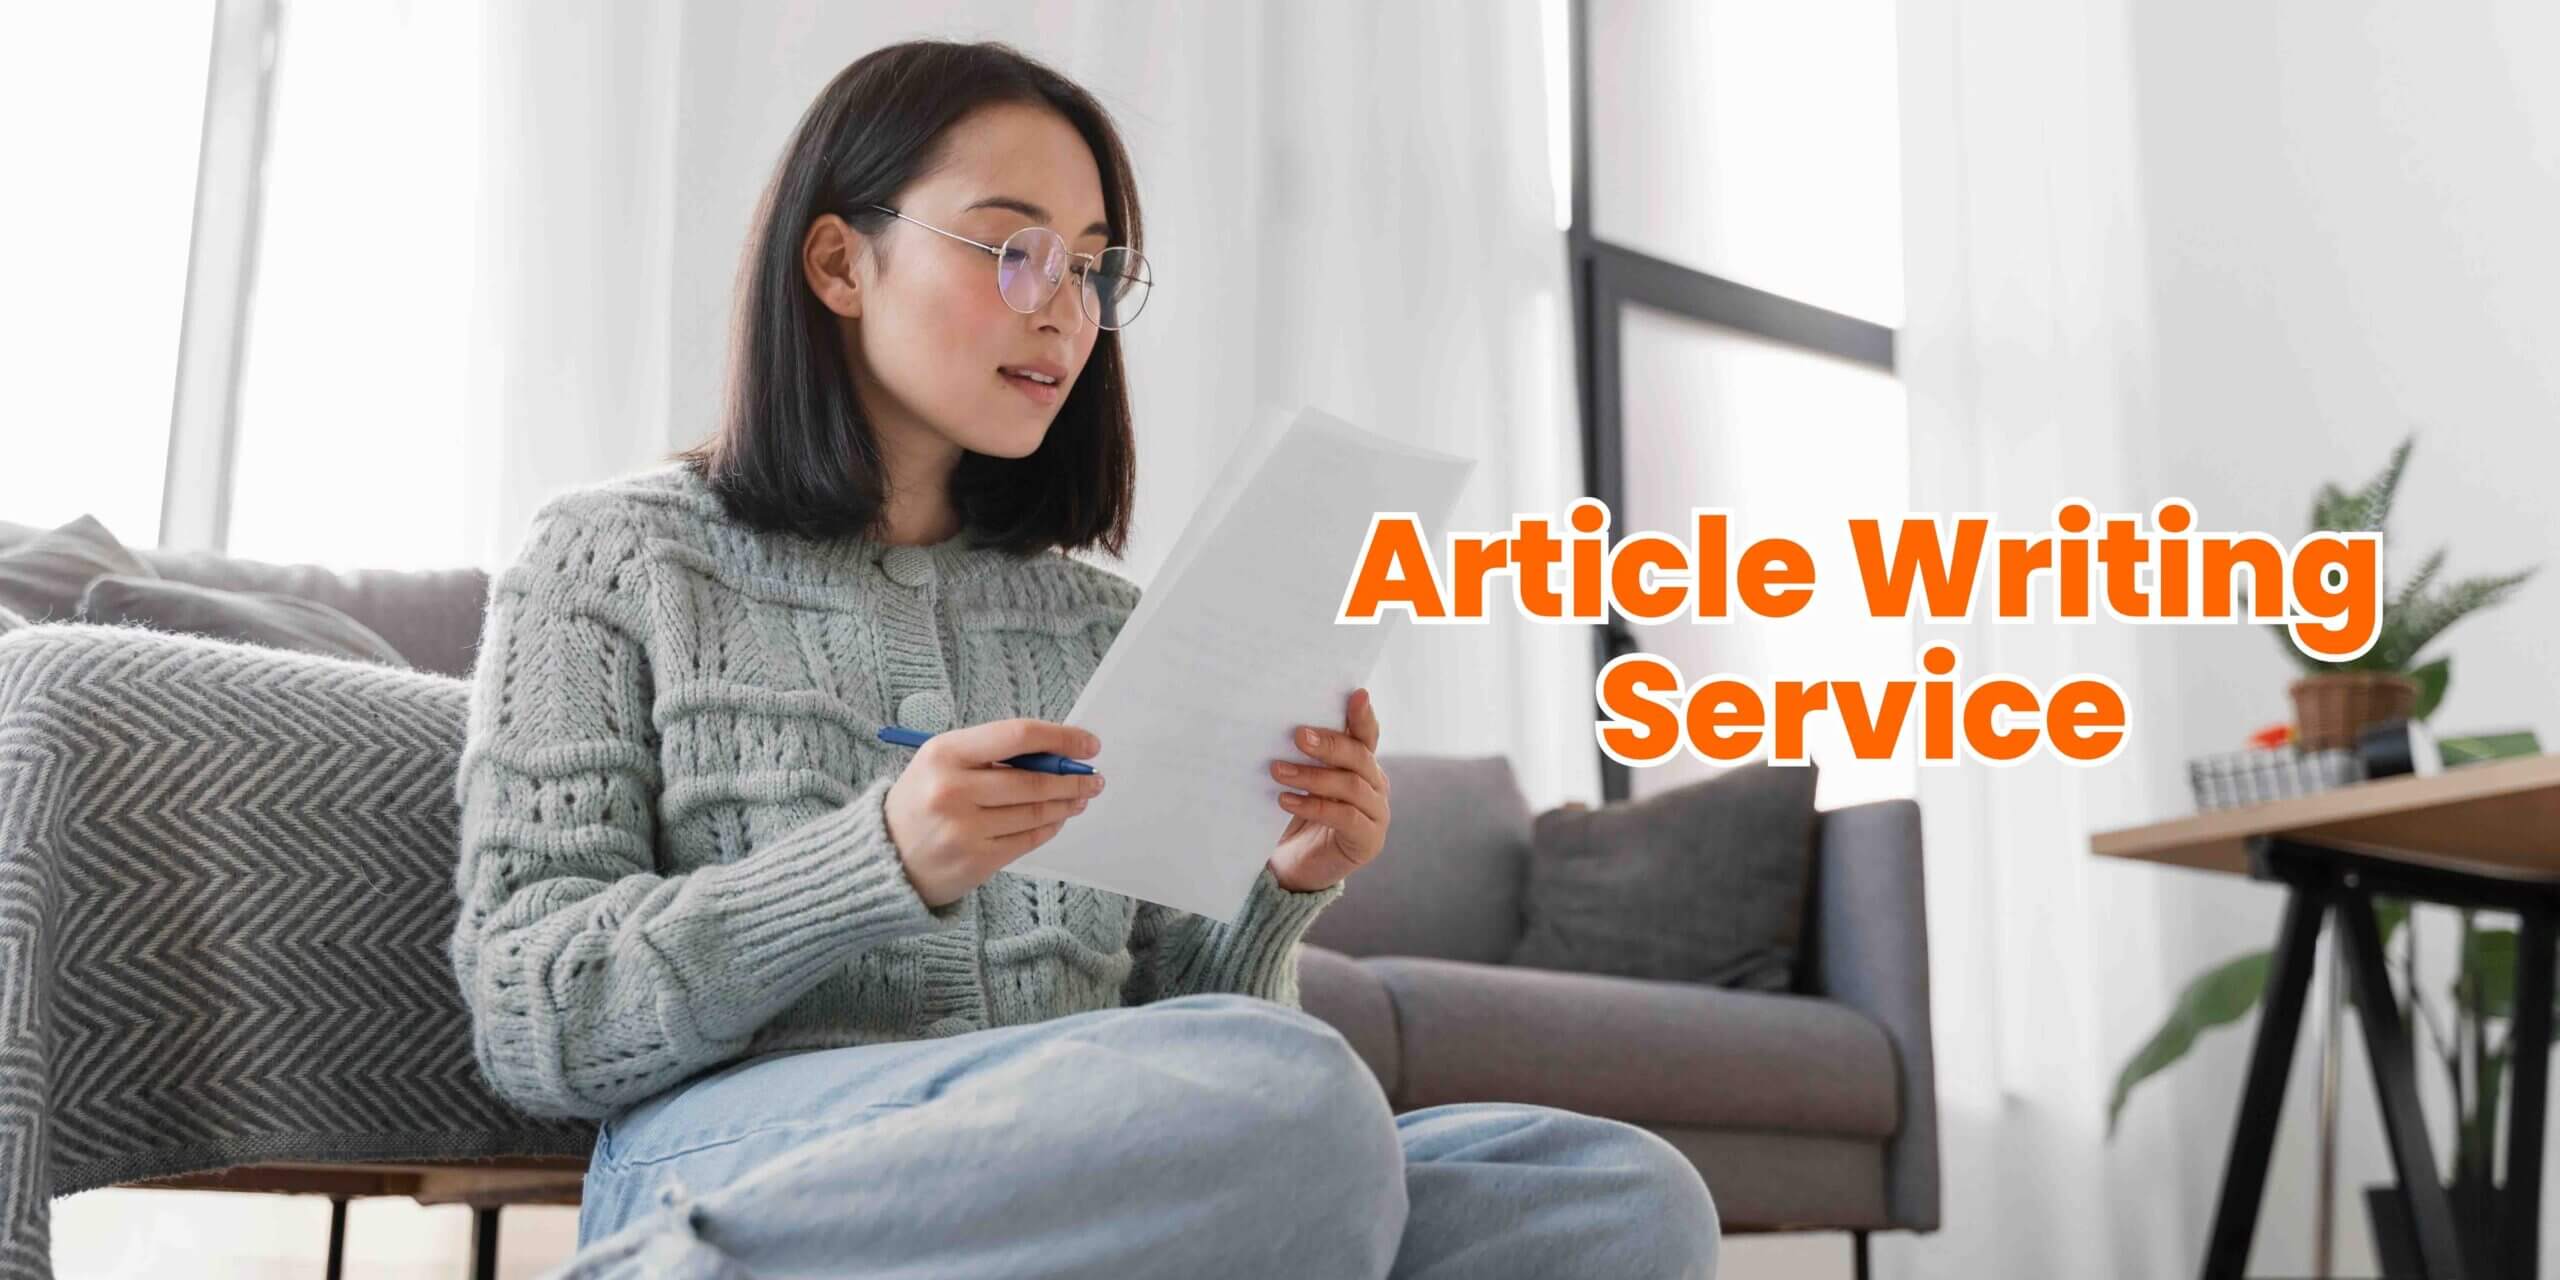 article writing service singapore,article writing services singapore,content writing services singapore,article writing service,article writing services,content writing service,content writing services,seo content writing service,seo writing service,product writing service,newsletter writing service